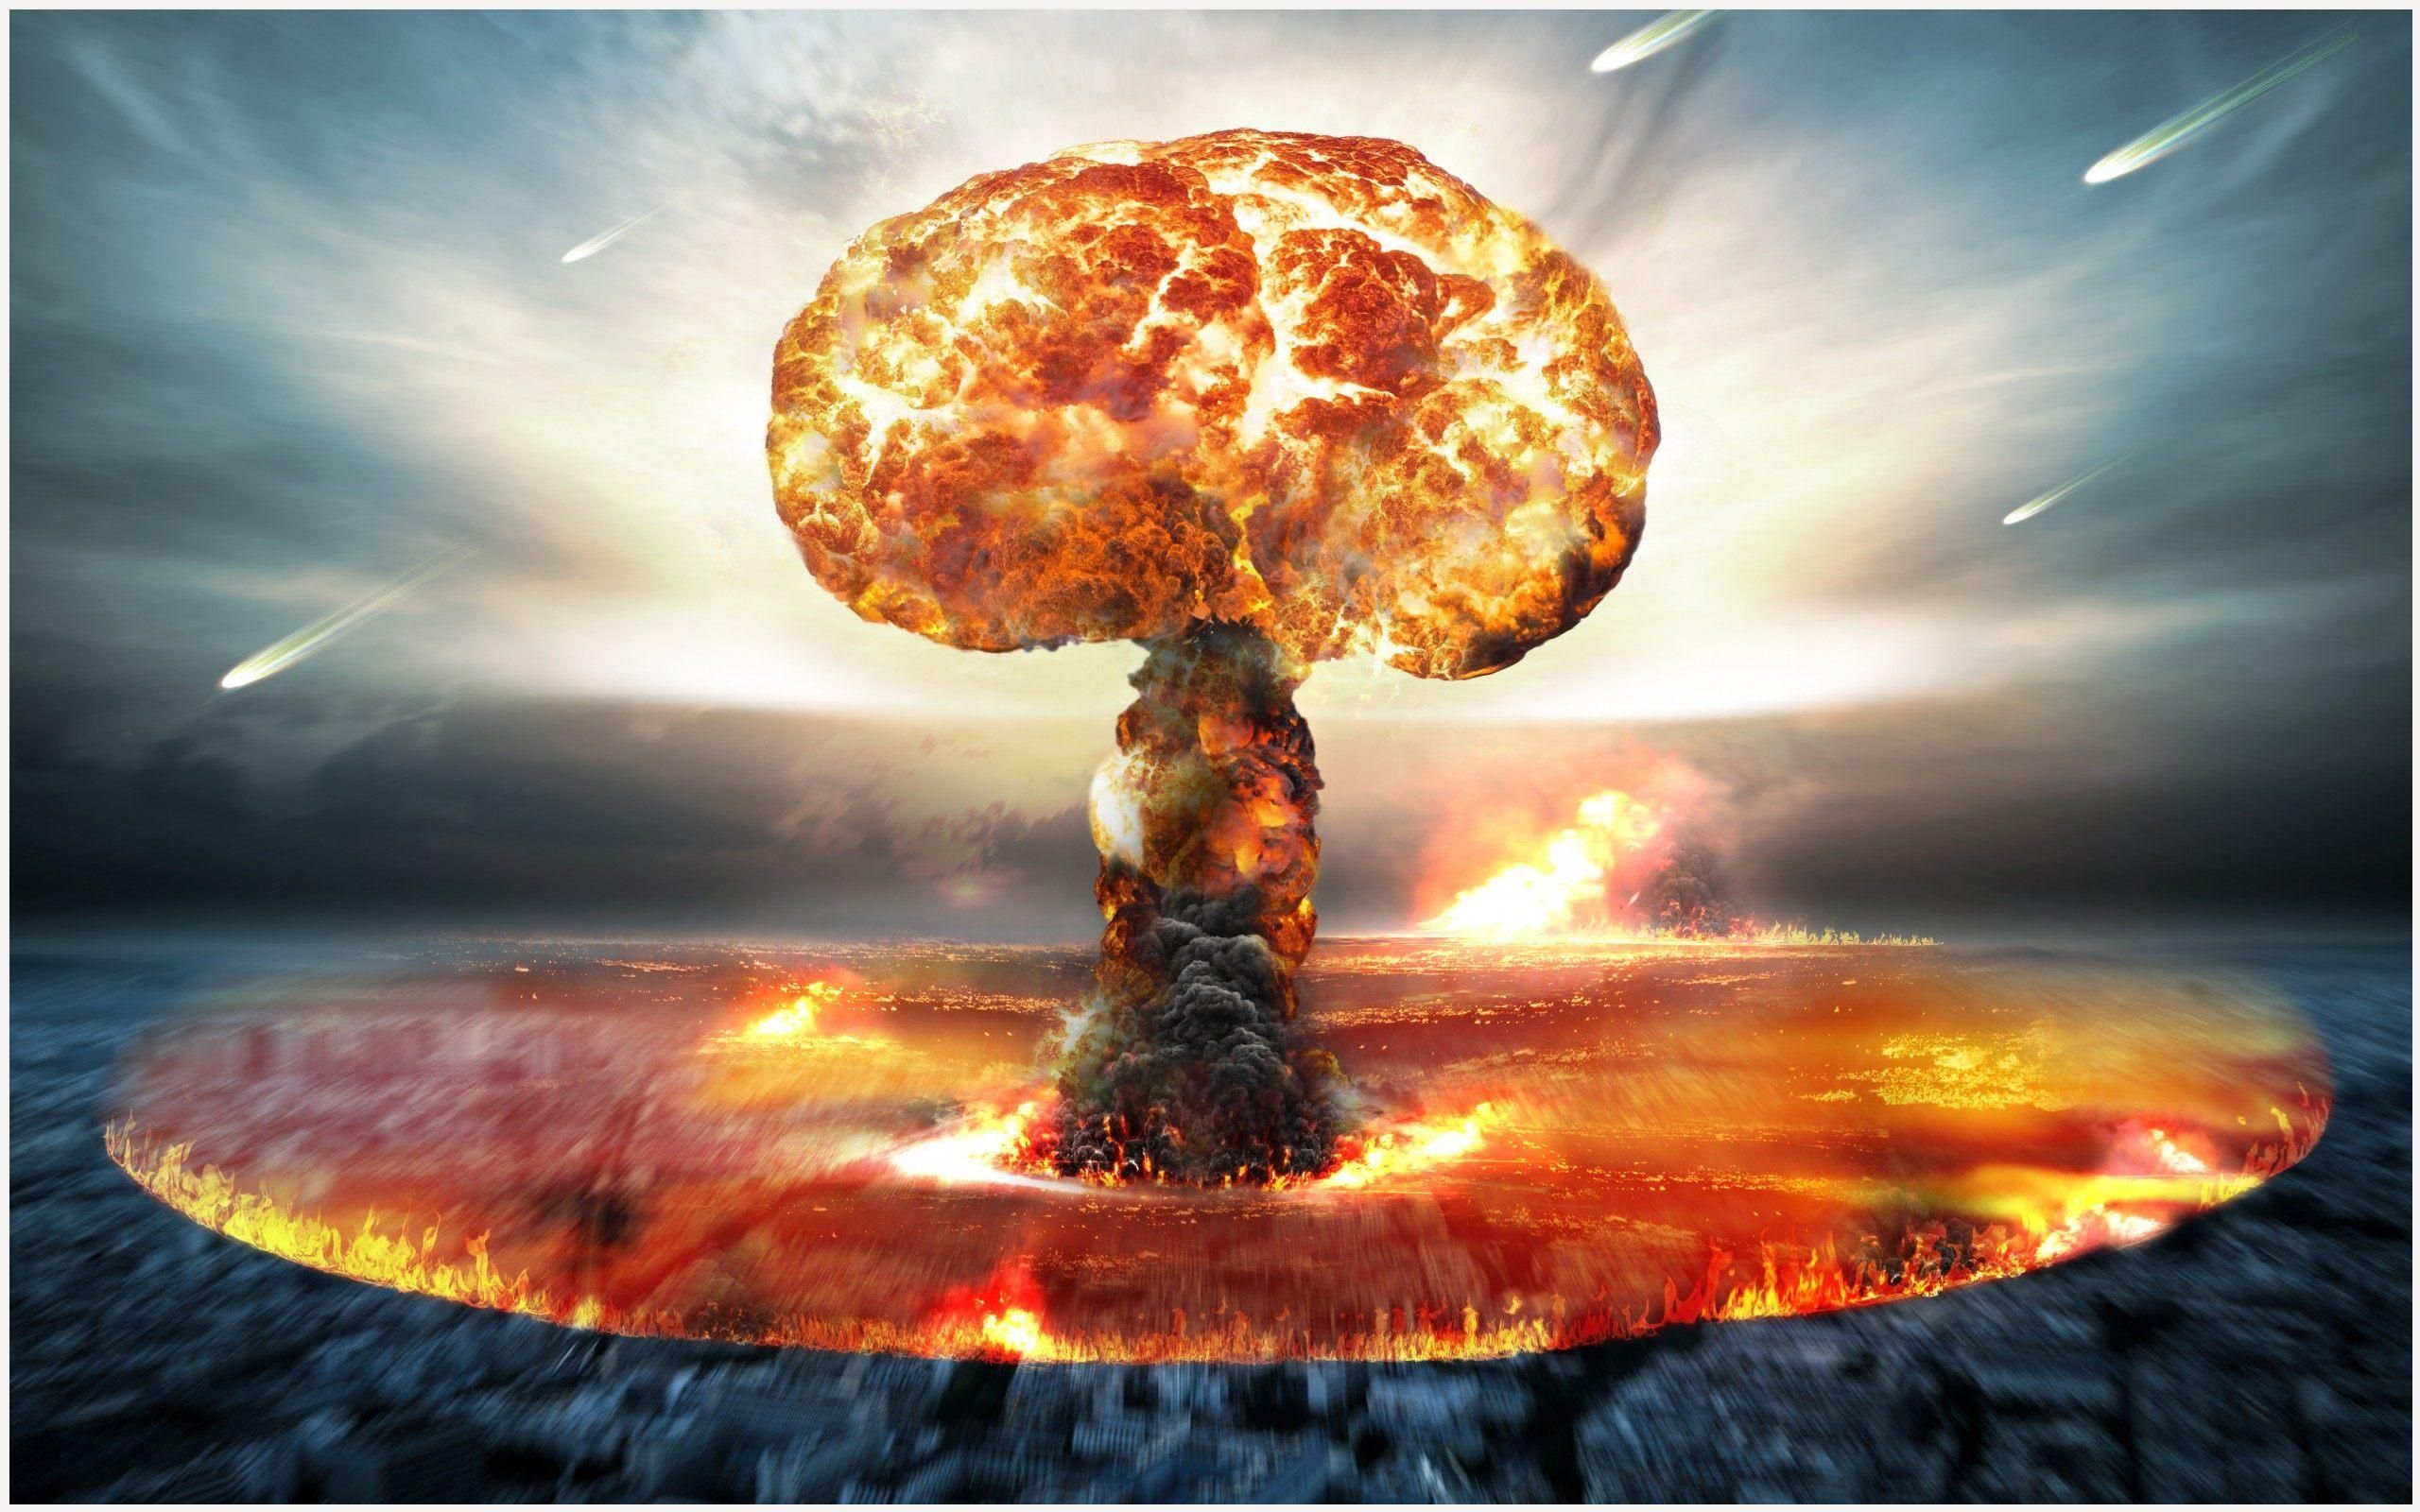 Nuclear Explosion Wallpaper. Doomsday clock, Nuclear bomb, Atomic